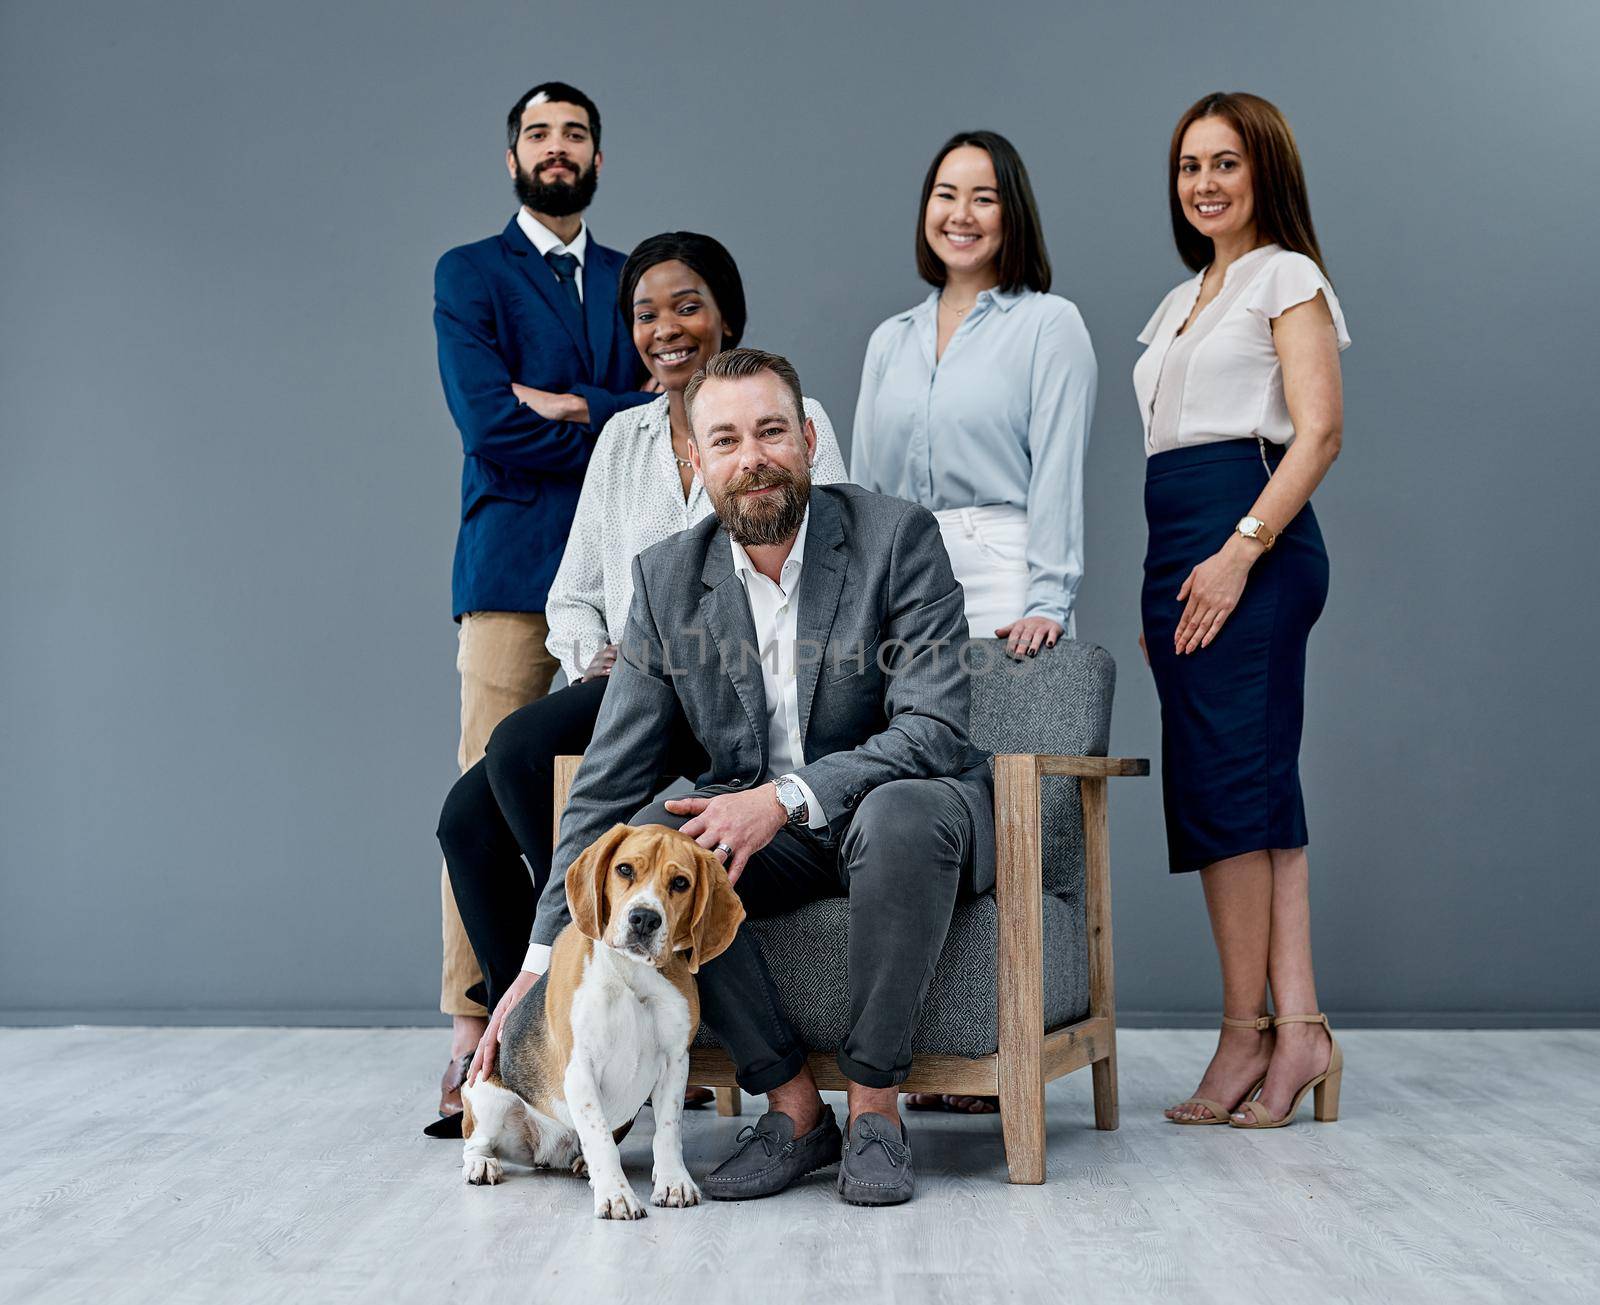 Pets in the workplace reduce stress and nurture productivity. Portrait of a group of businesspeople posing together with a dog against a grey background. by YuriArcurs